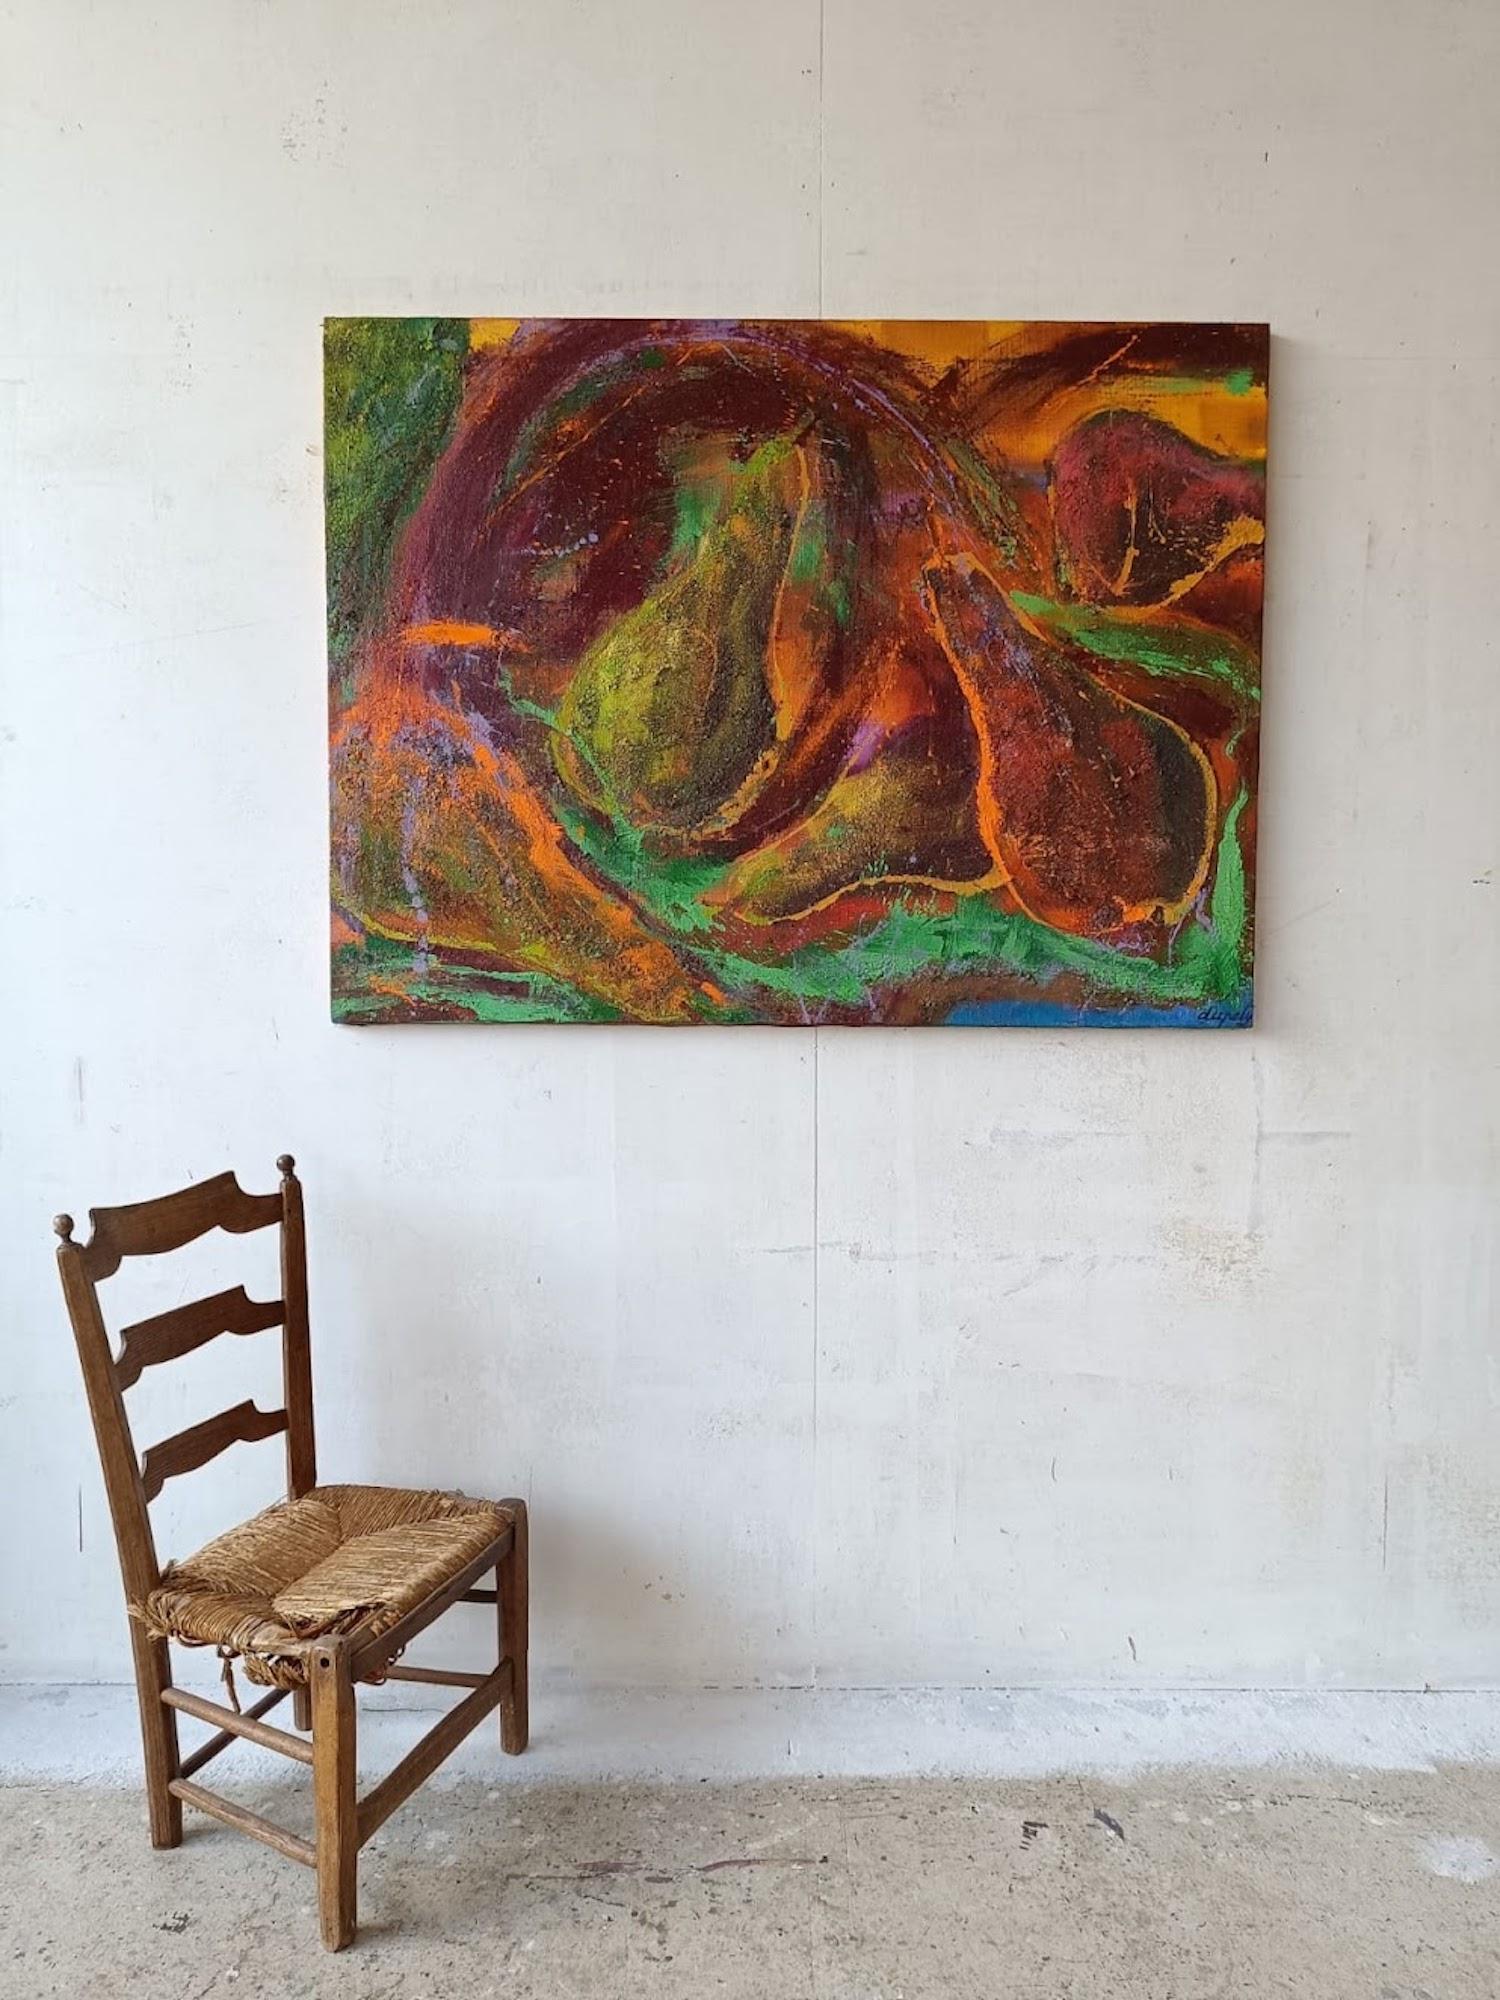 The Forge is a unique oil on canvas painting by contemporary artist Christophe Dupety, dimensions are 97 × 130 cm (38.2 × 51.2 in).
The artwork is signed, sold unframed and comes with a certificate of authenticity.

The artist has chosen fruits as